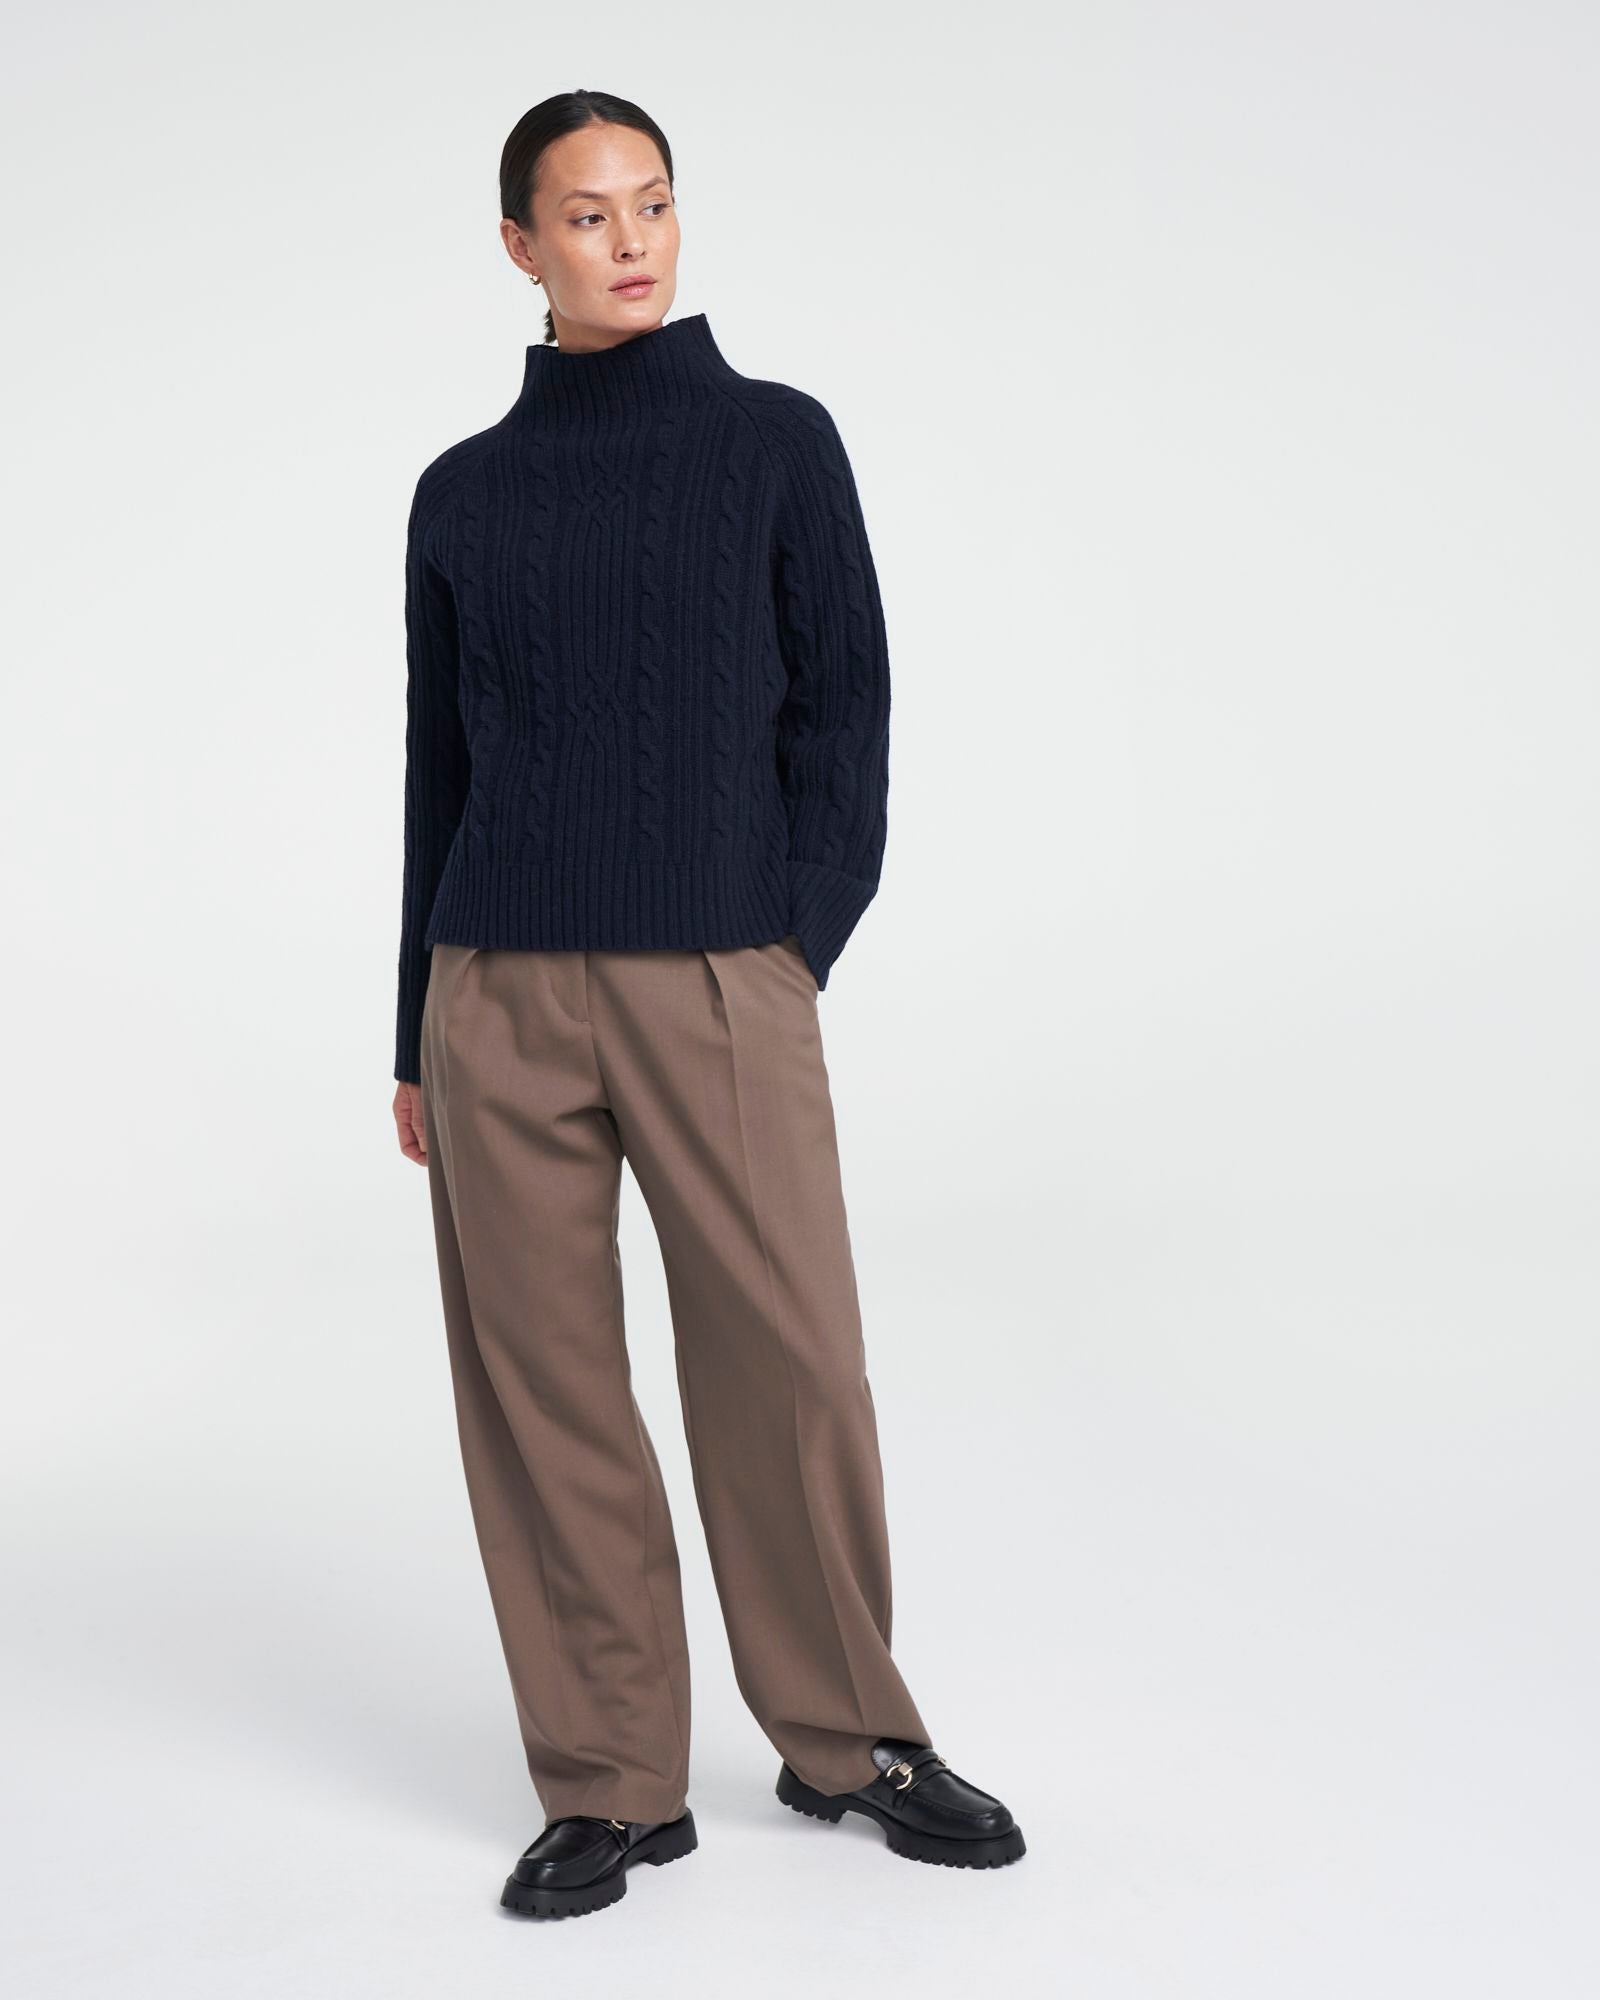 Inger Cable Knit Turtle Neck Sweater - Navy